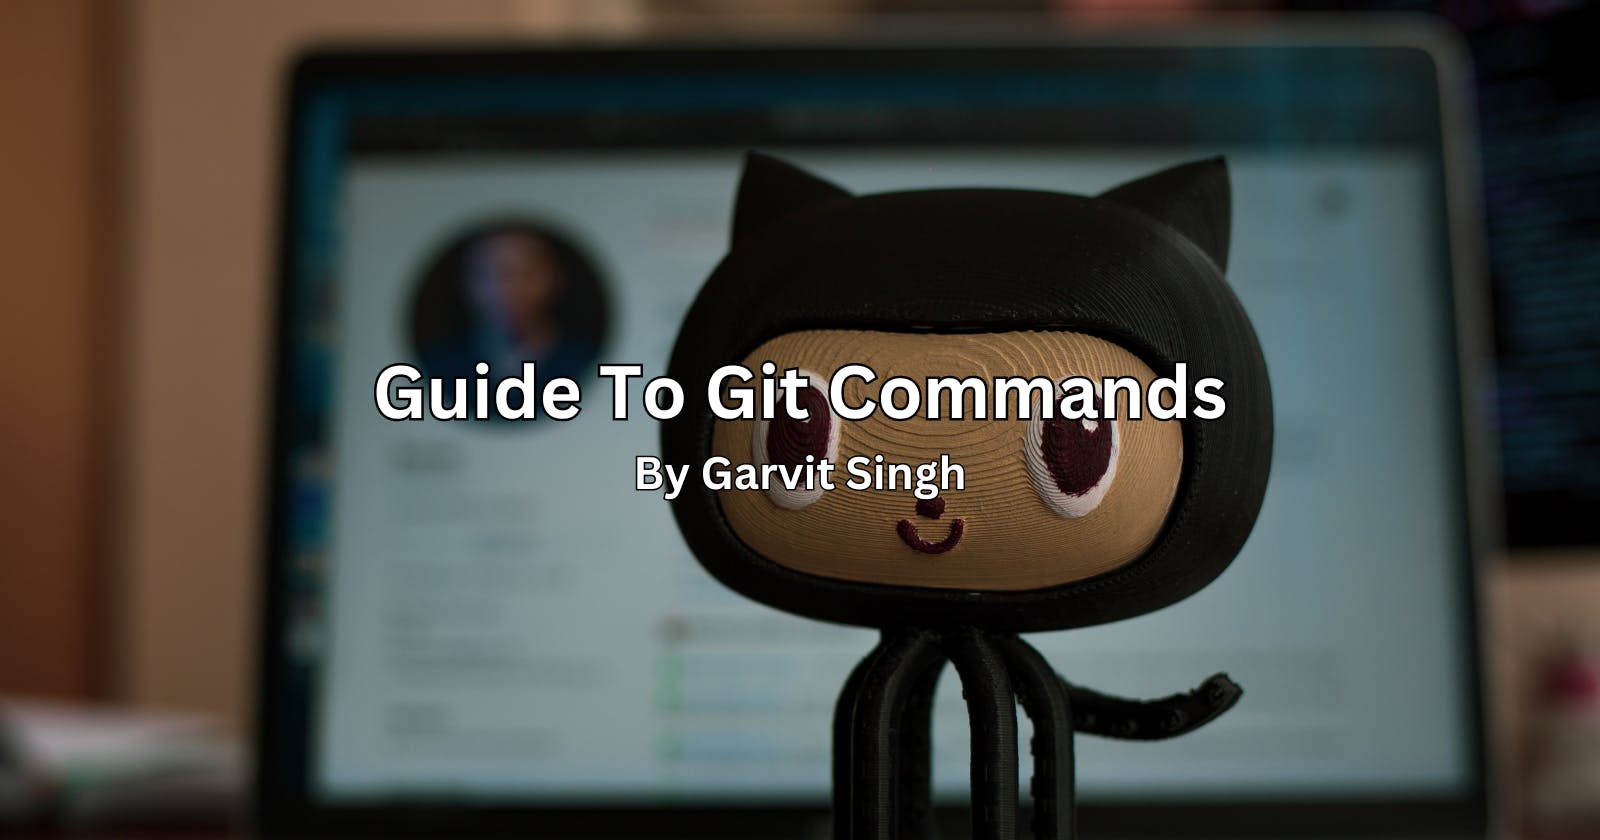 Complete Guide To Git Commands